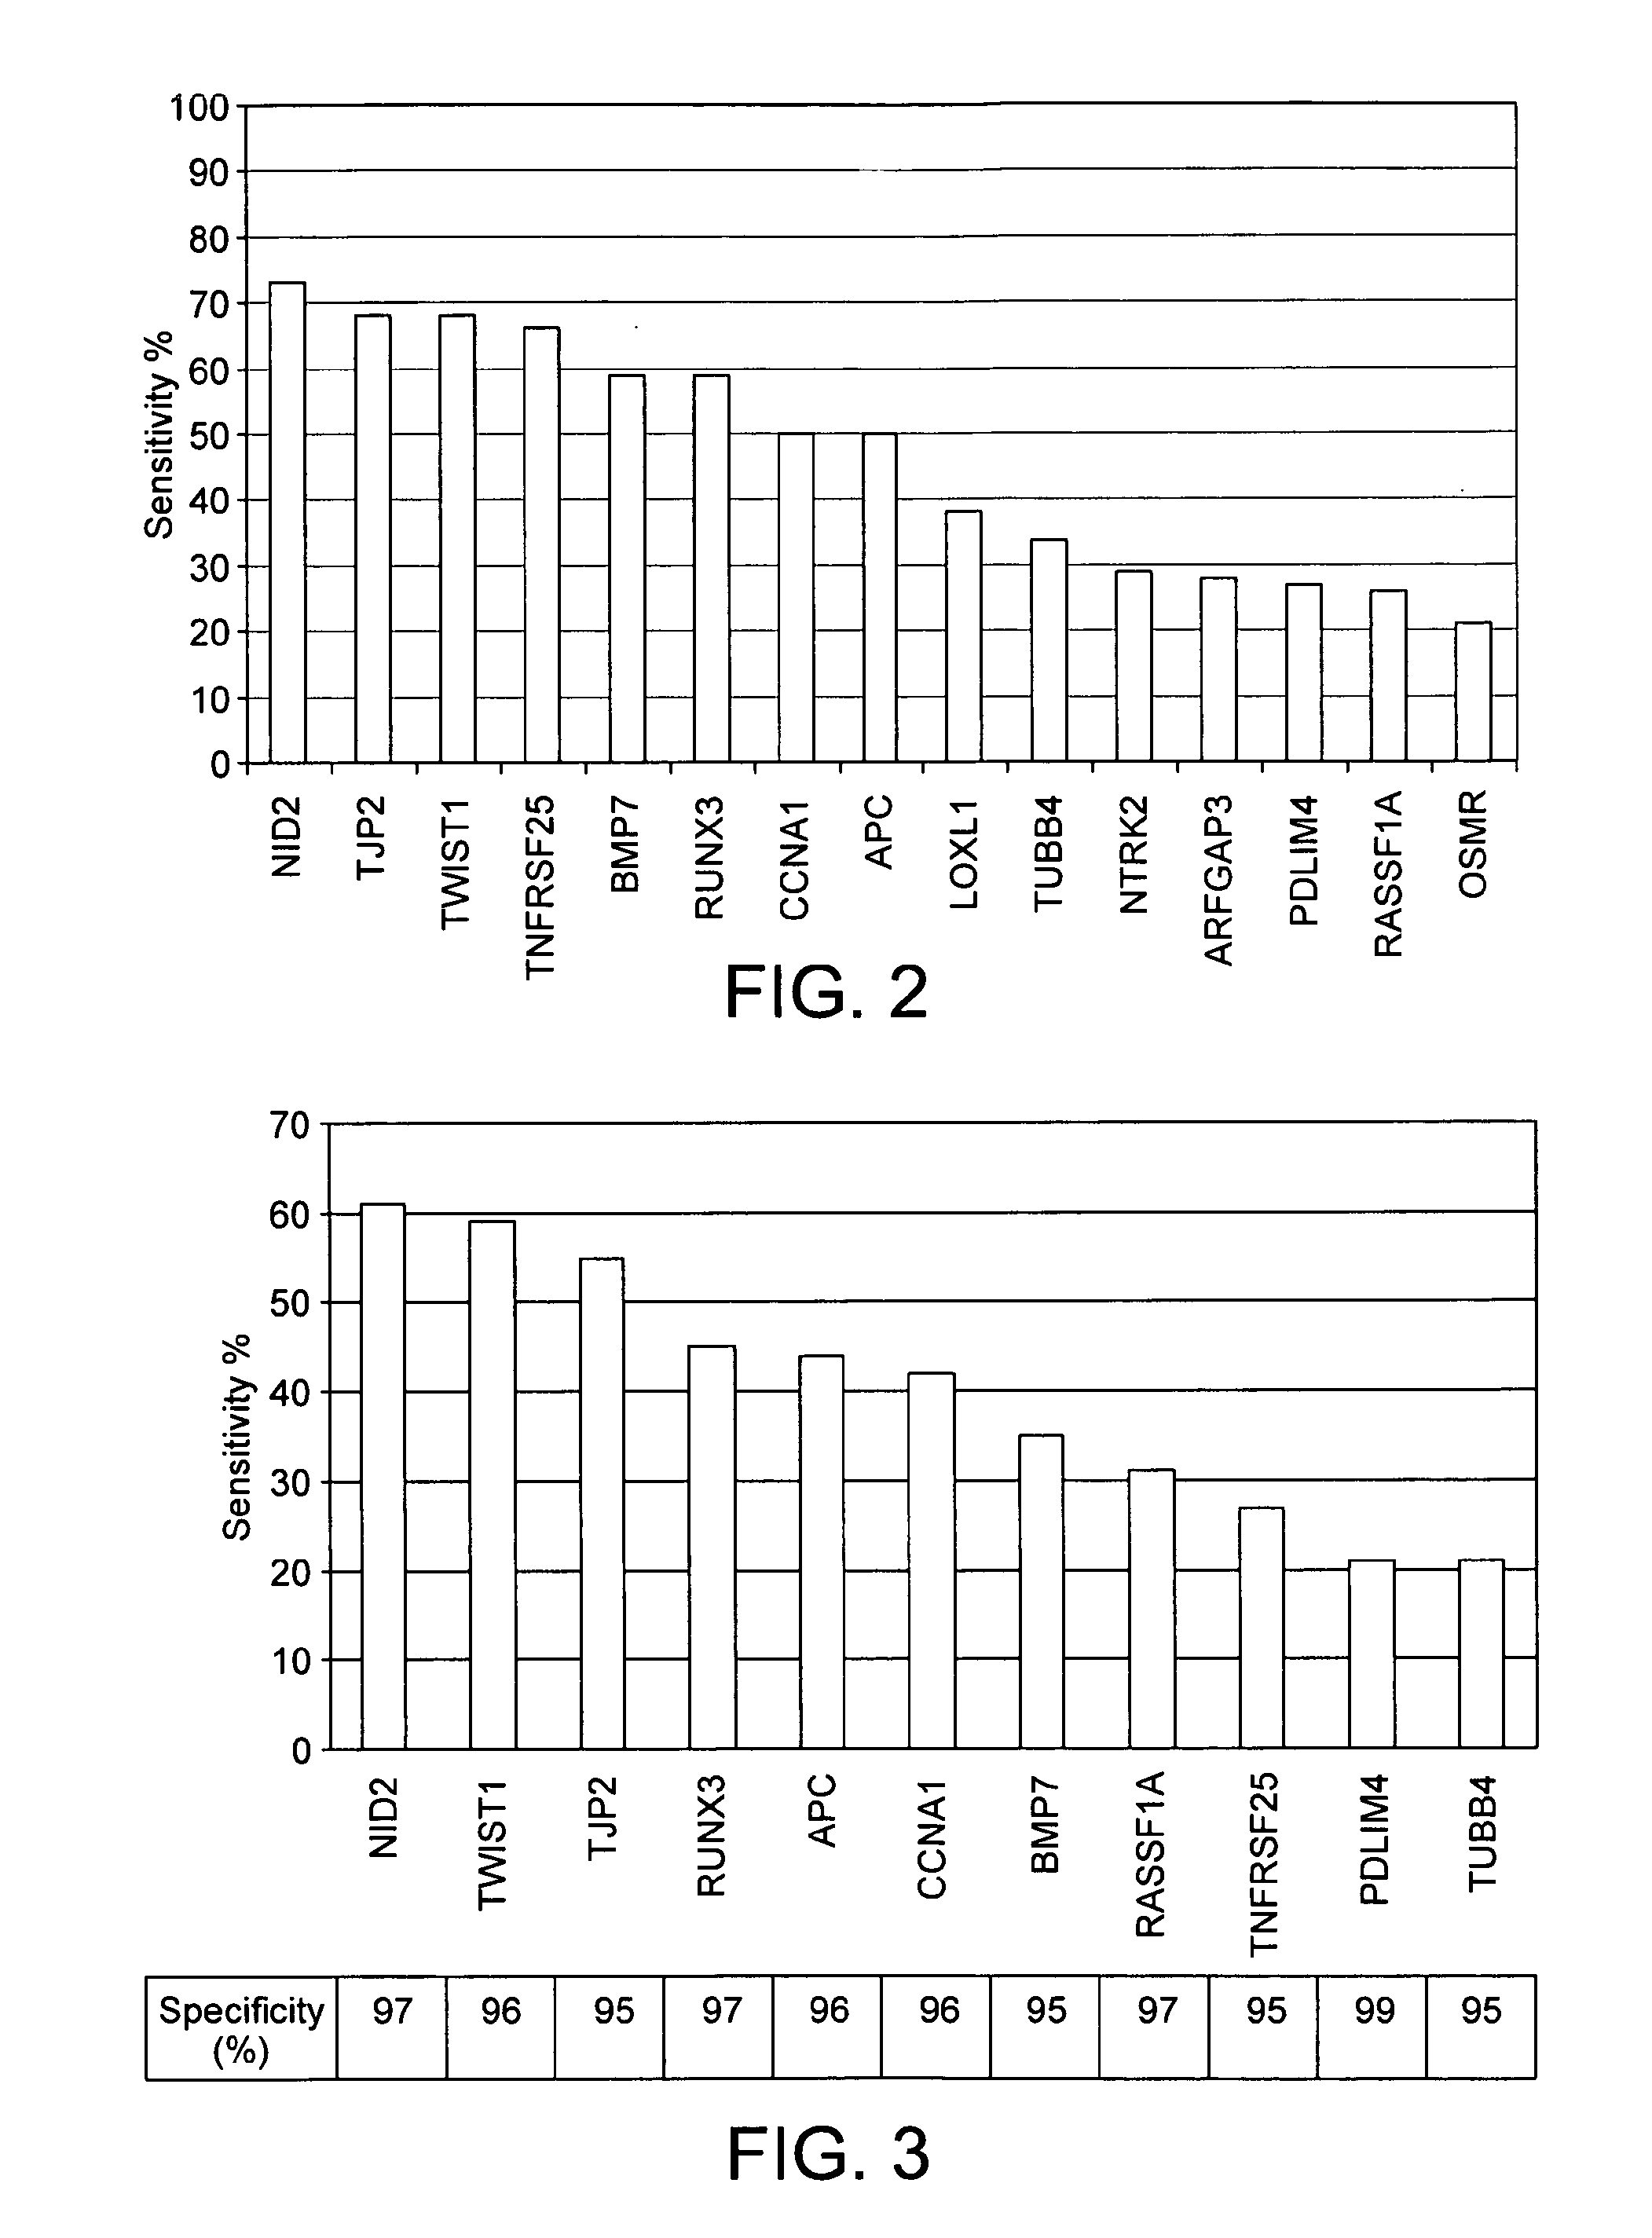 Method for Determining the Methylation Status of the Promoter Region of the TWIST1 Gene in Genomic DNA from Bladder Cells